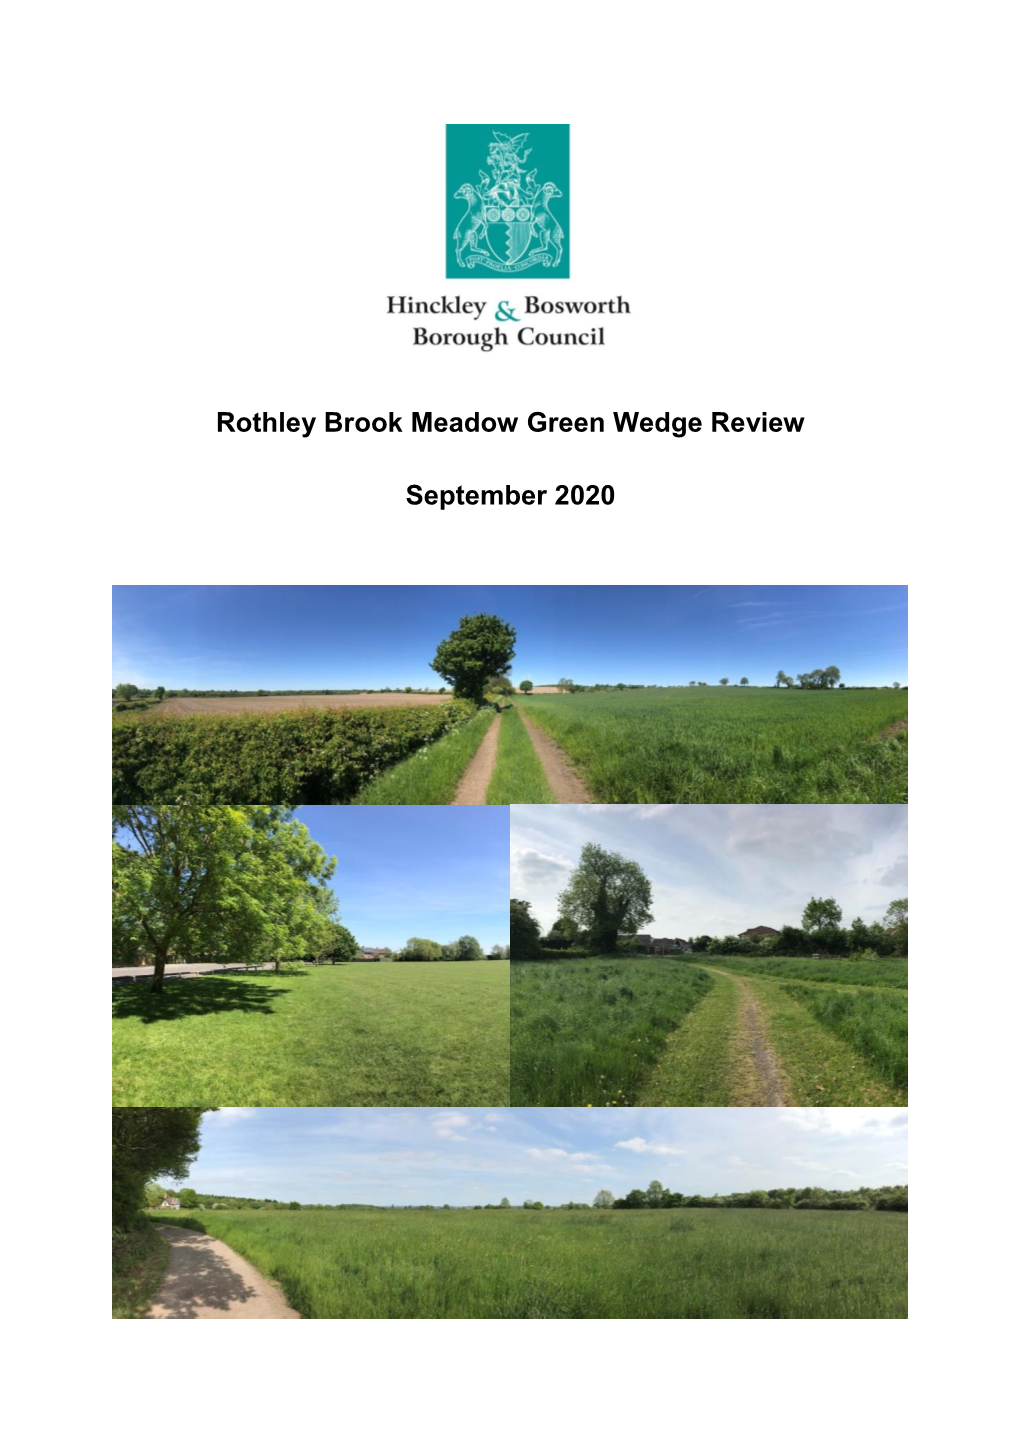 Rothley Brook Meadow Green Wedge Review